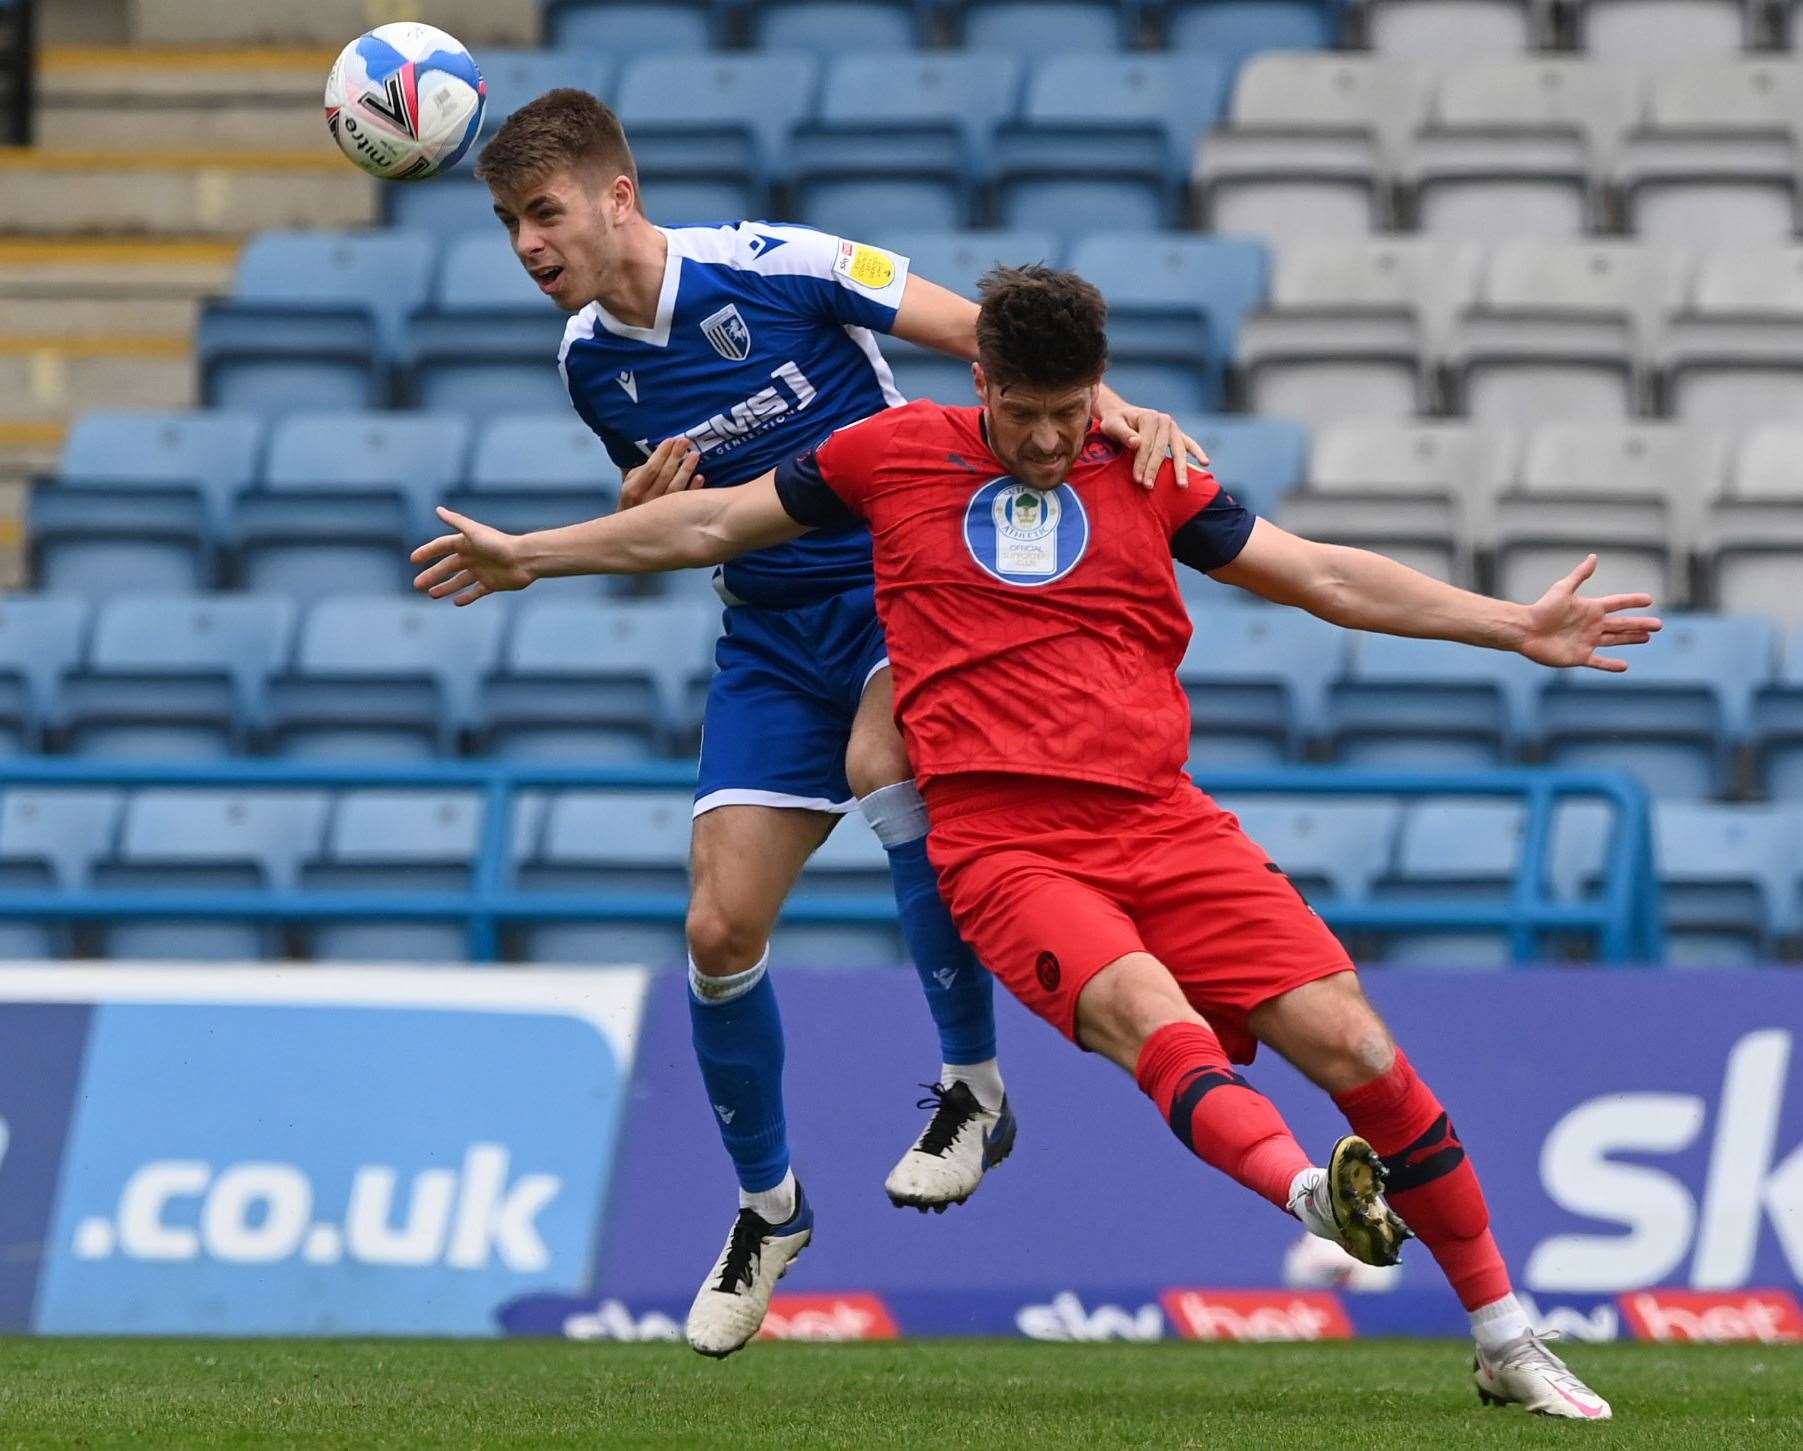 Jack Tucker heads clear for Gills. Picture: Keith Gillard